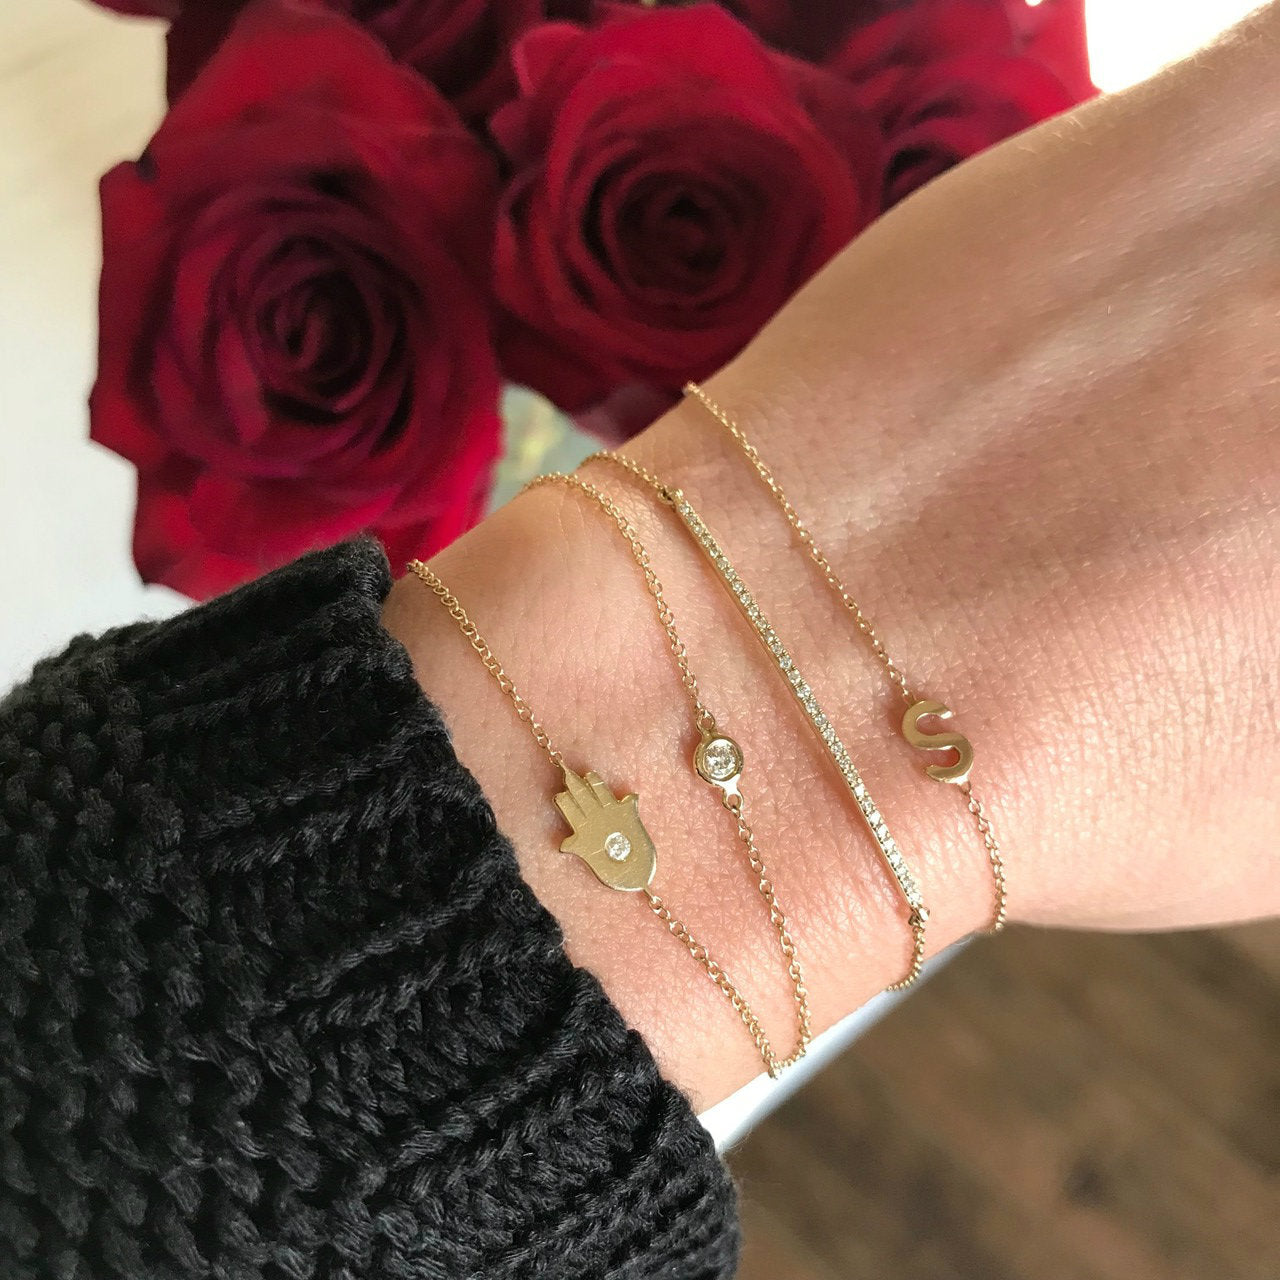  14k Gold Initial Bracelet 14k Solid Gold Personalized